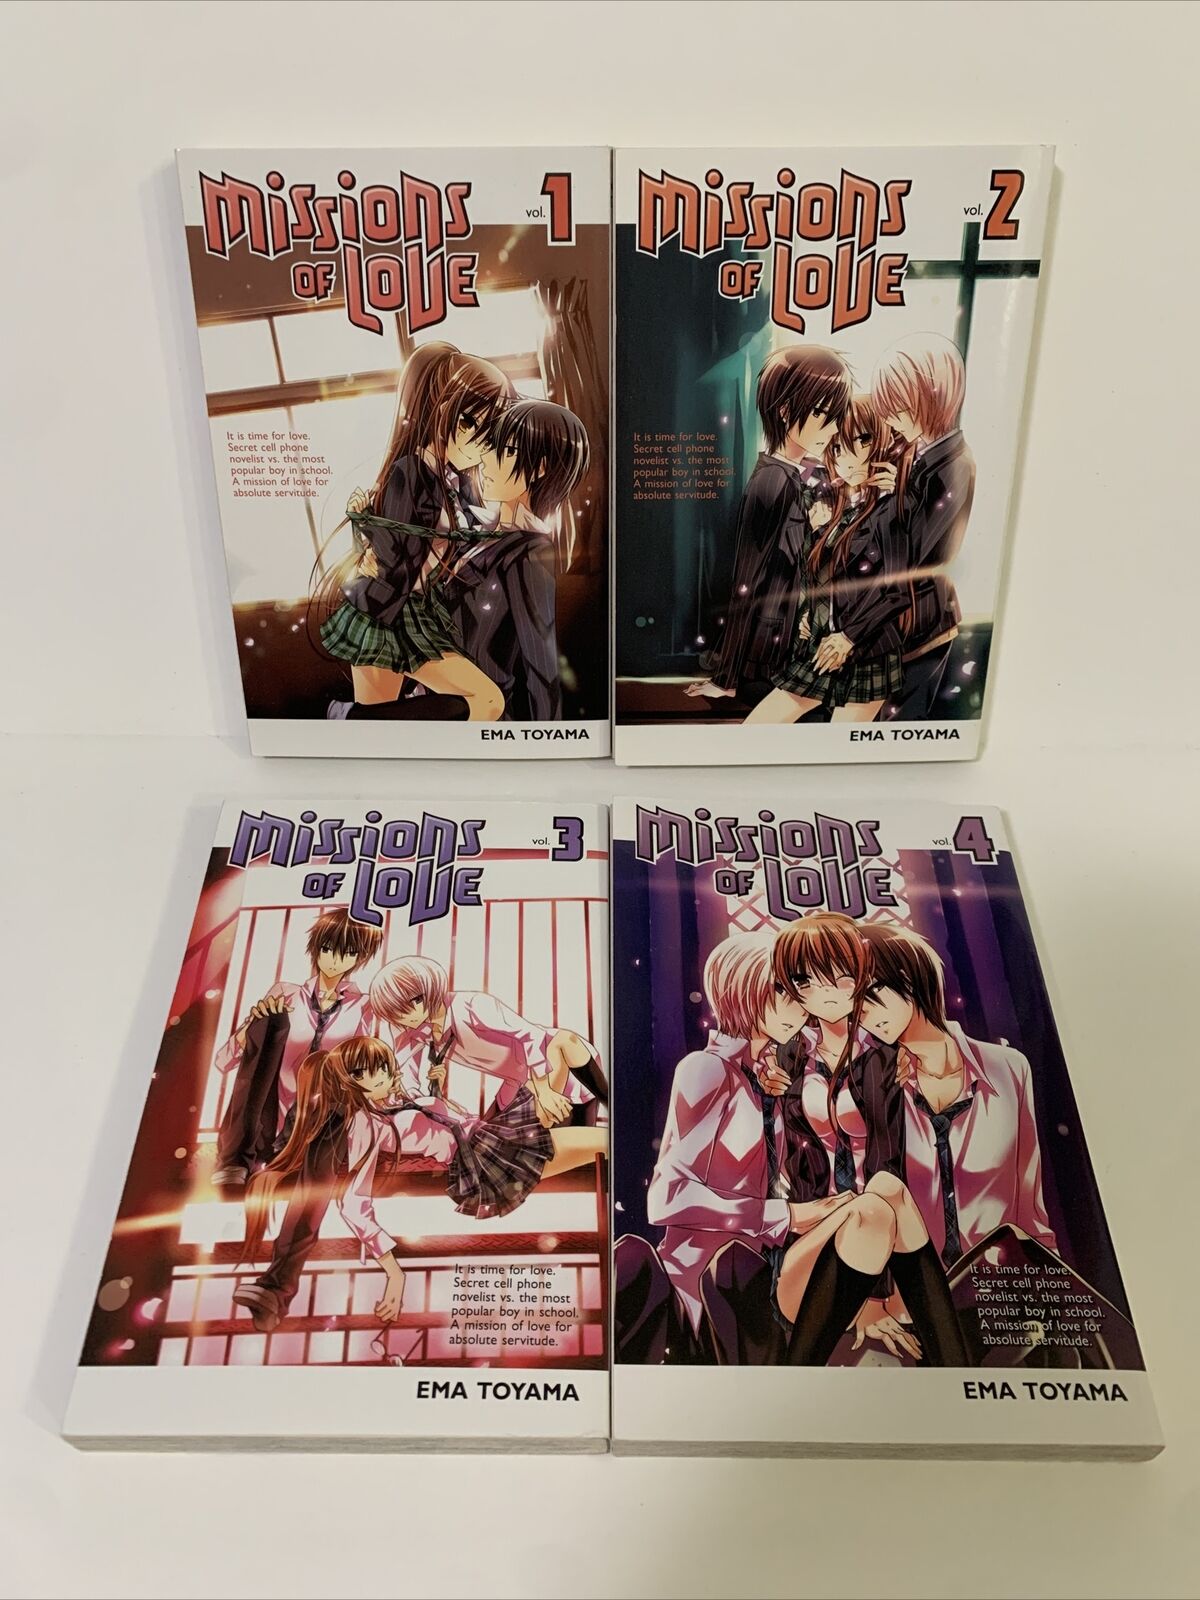 Missions Of Love Volumes 1, 2, 3 And 4 Manga Lot By Ema Toyama English 